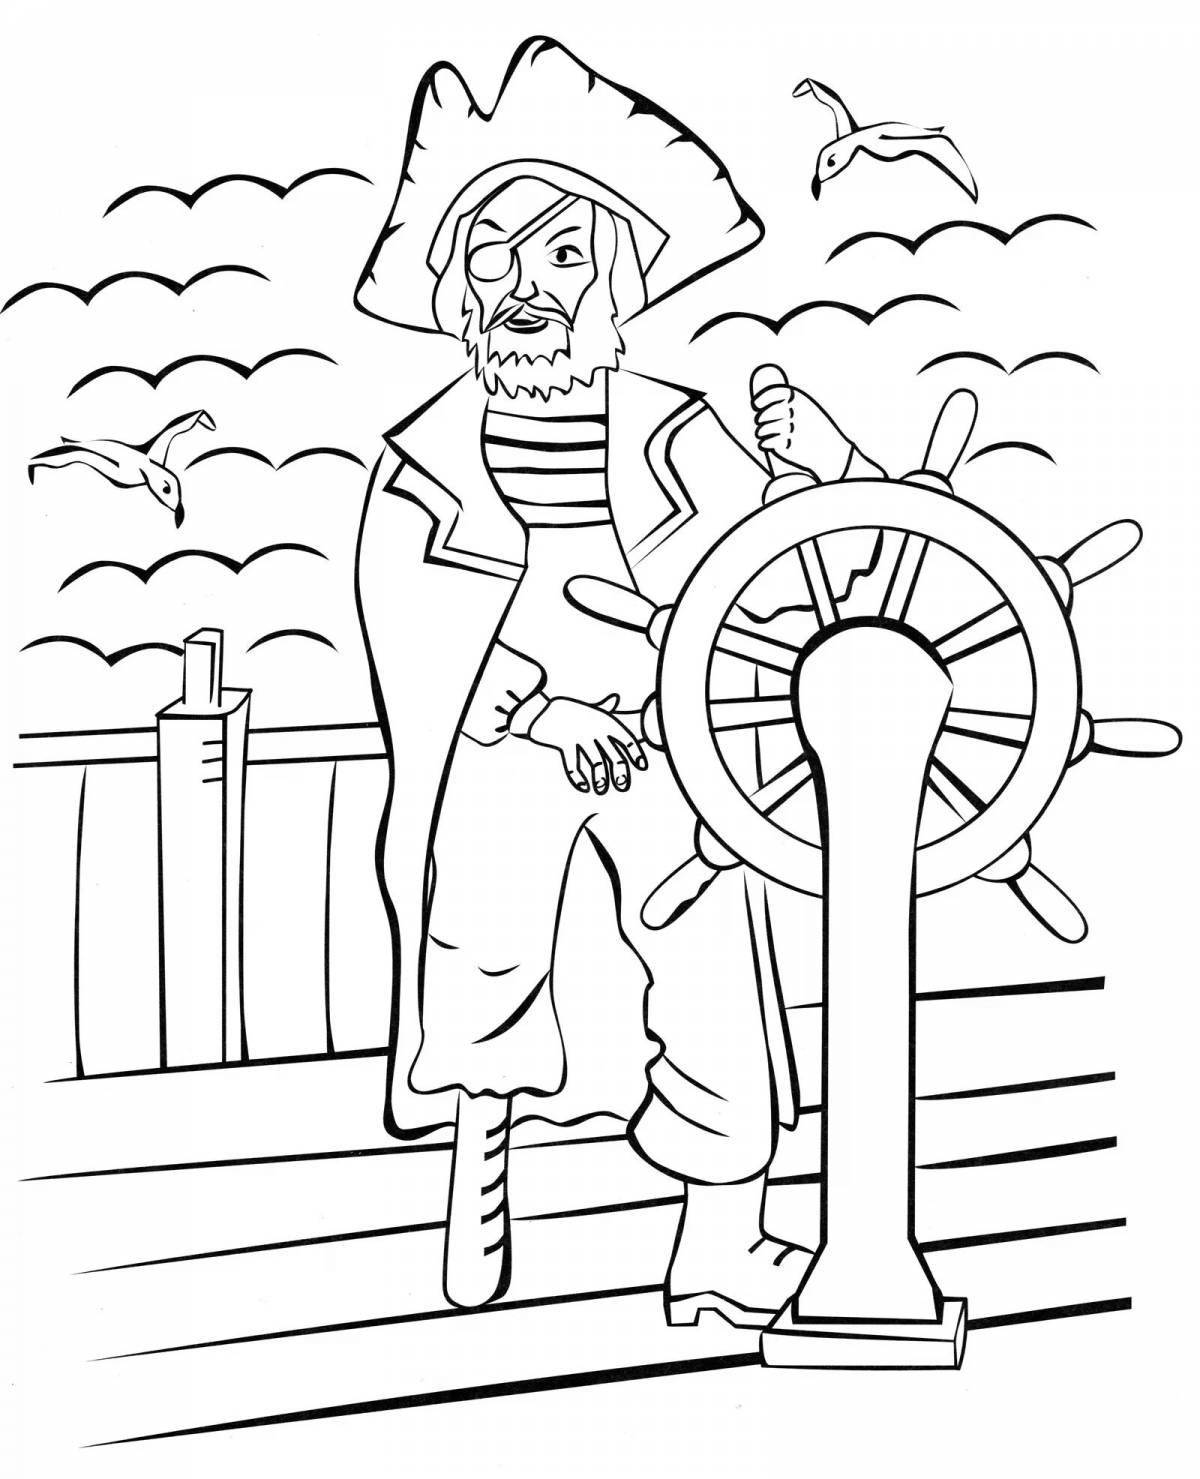 Coloring page glorious captain of the ship